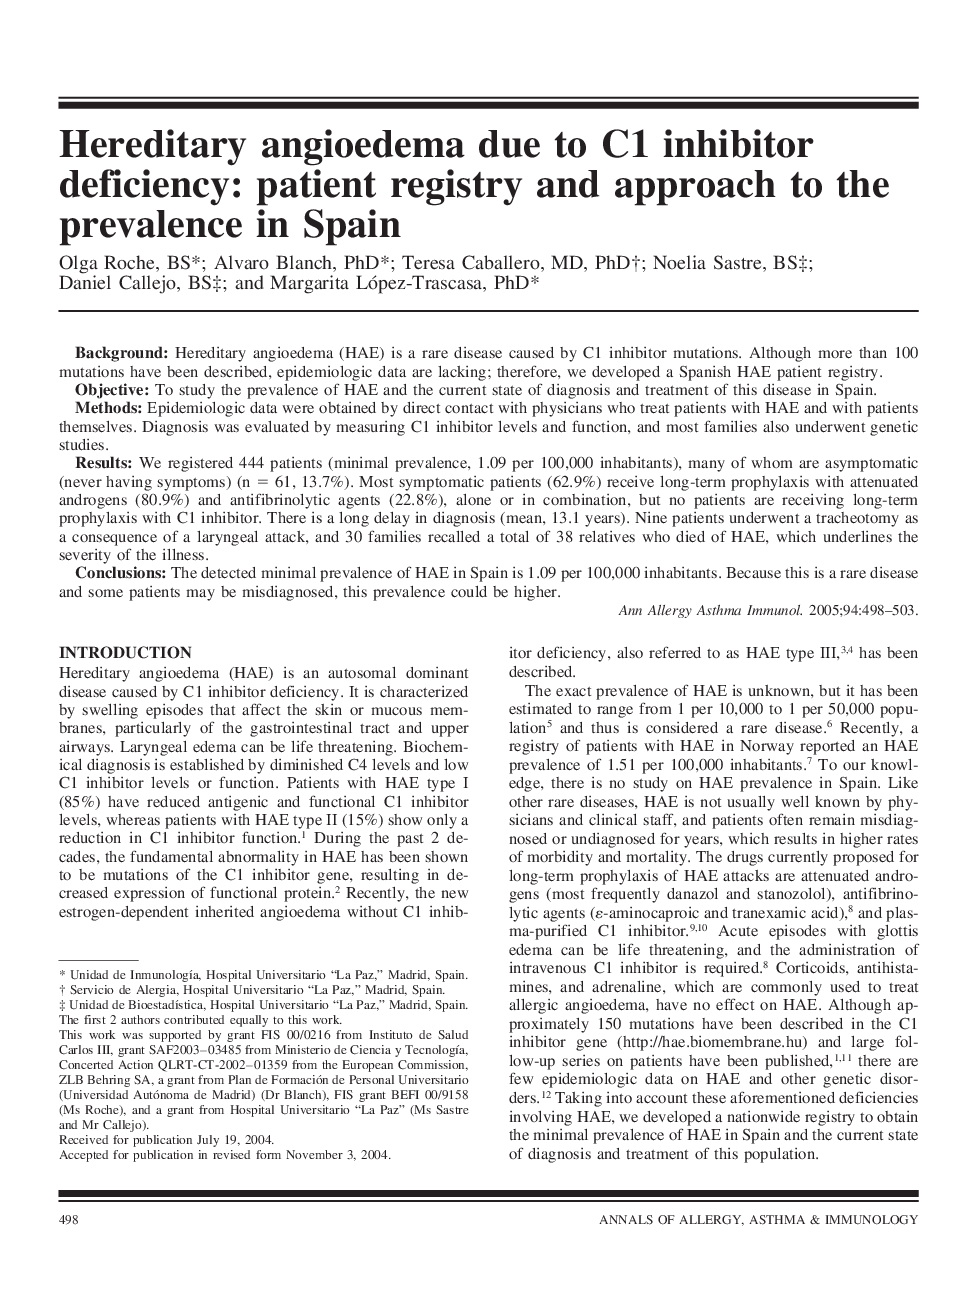 Hereditary angioedema due to C1 inhibitor deficiency: patient registry and approach to the prevalence in Spain